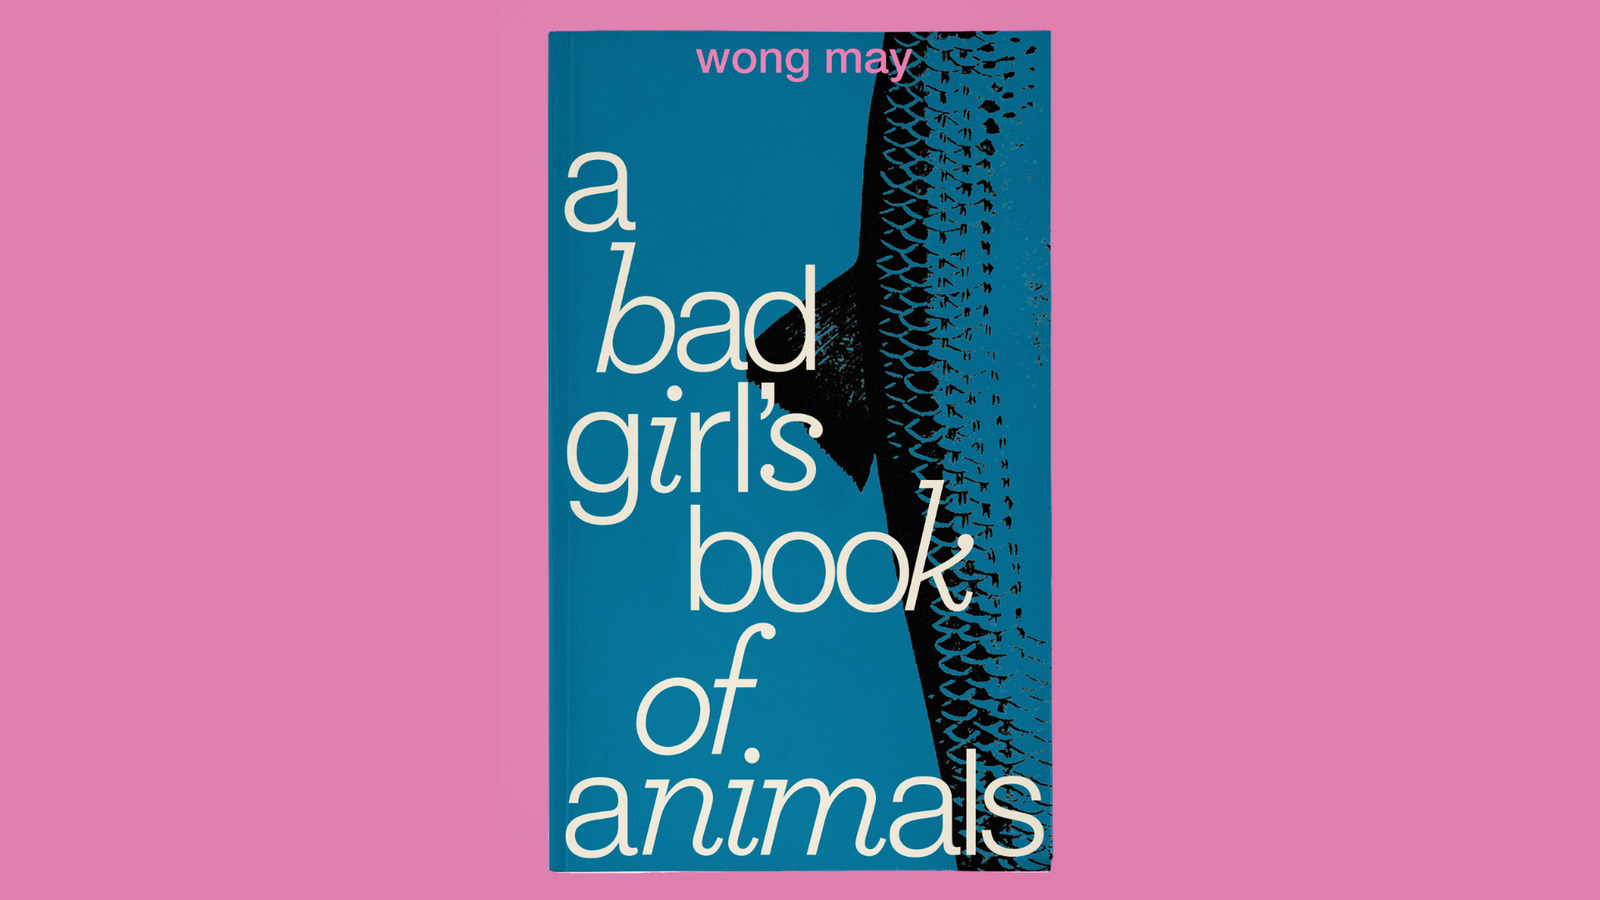 ‘knee-deep in debt in darkness’: a review of Wong May’s ‘A Bad Girl’s Book of Animals’